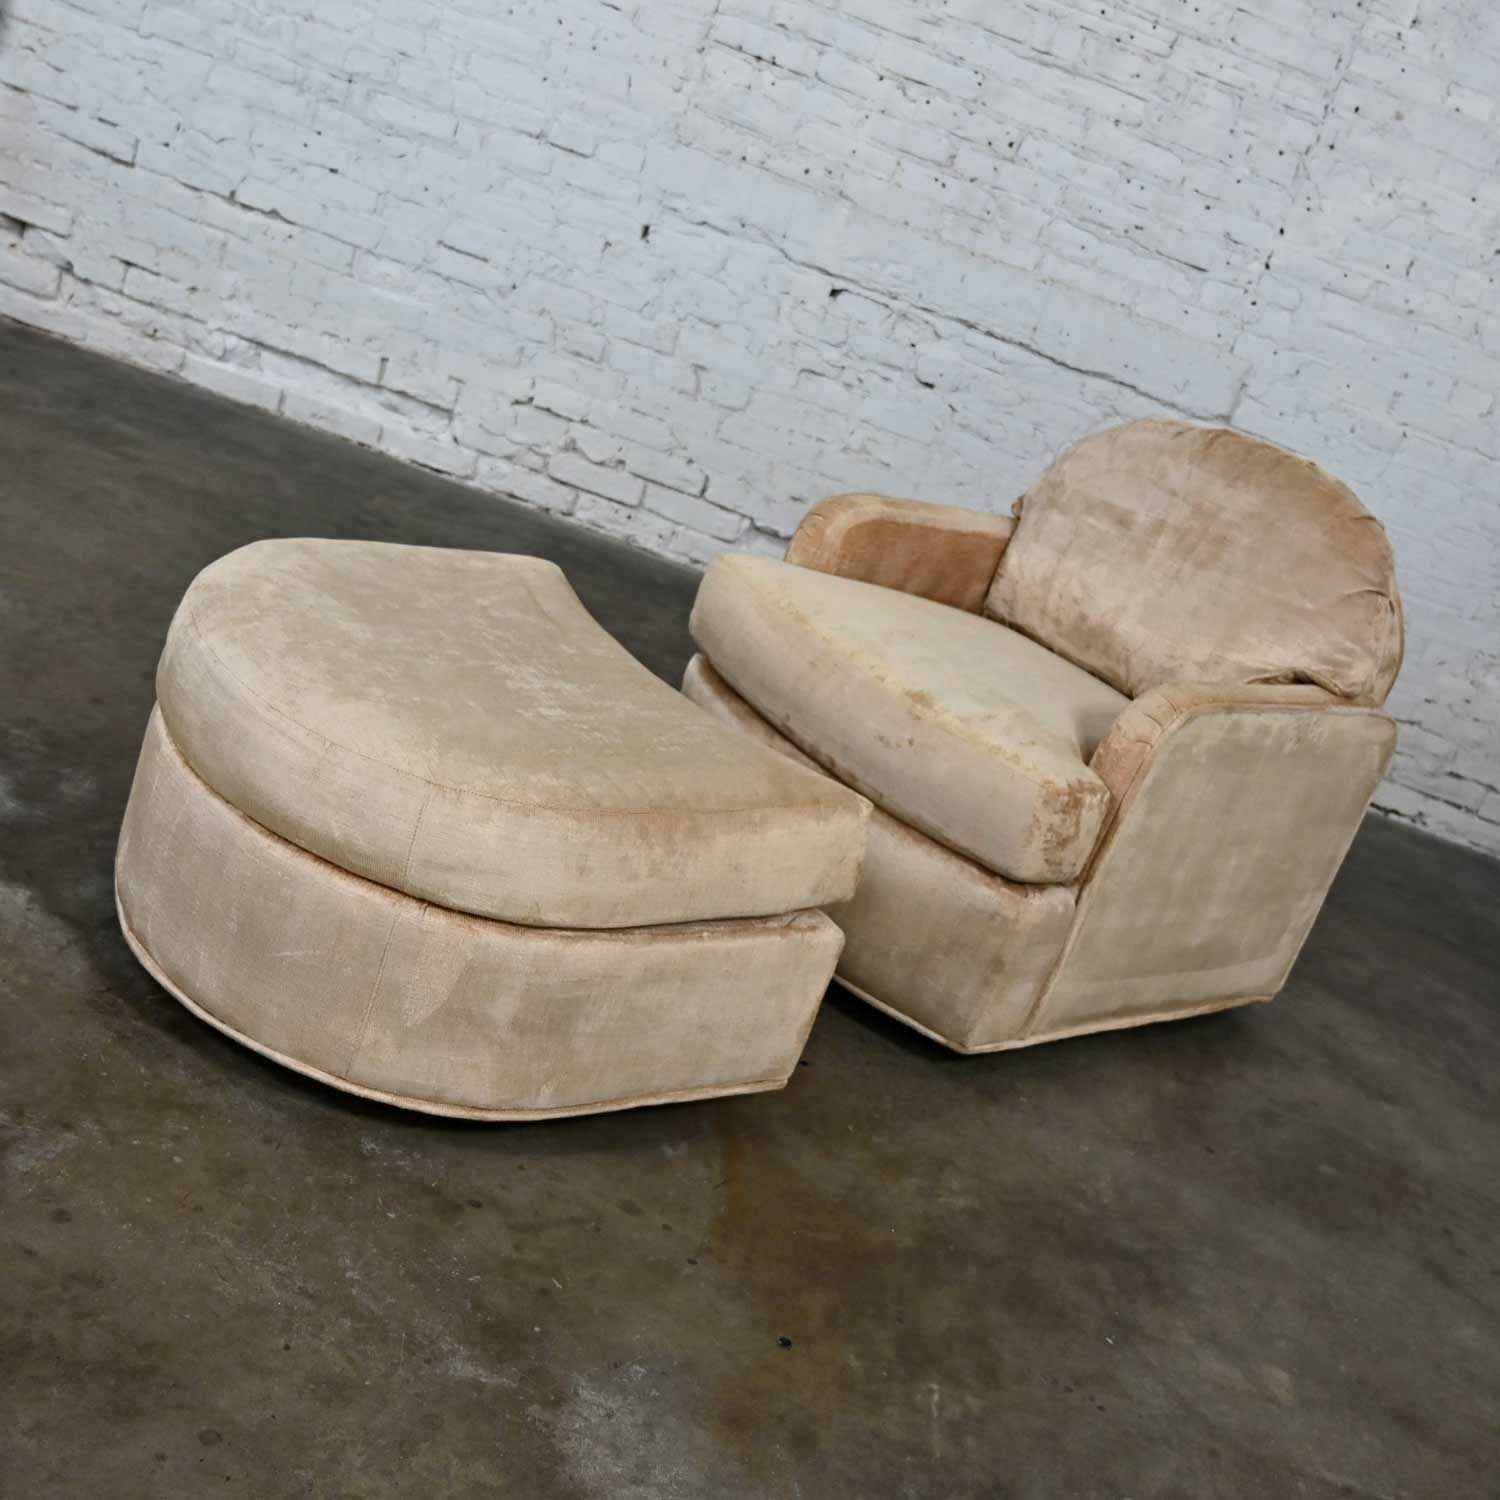 Vintage Modern Drexel Club Chair & Ottoman with Casters Original Tan Chenille Fabric with Welting Trim